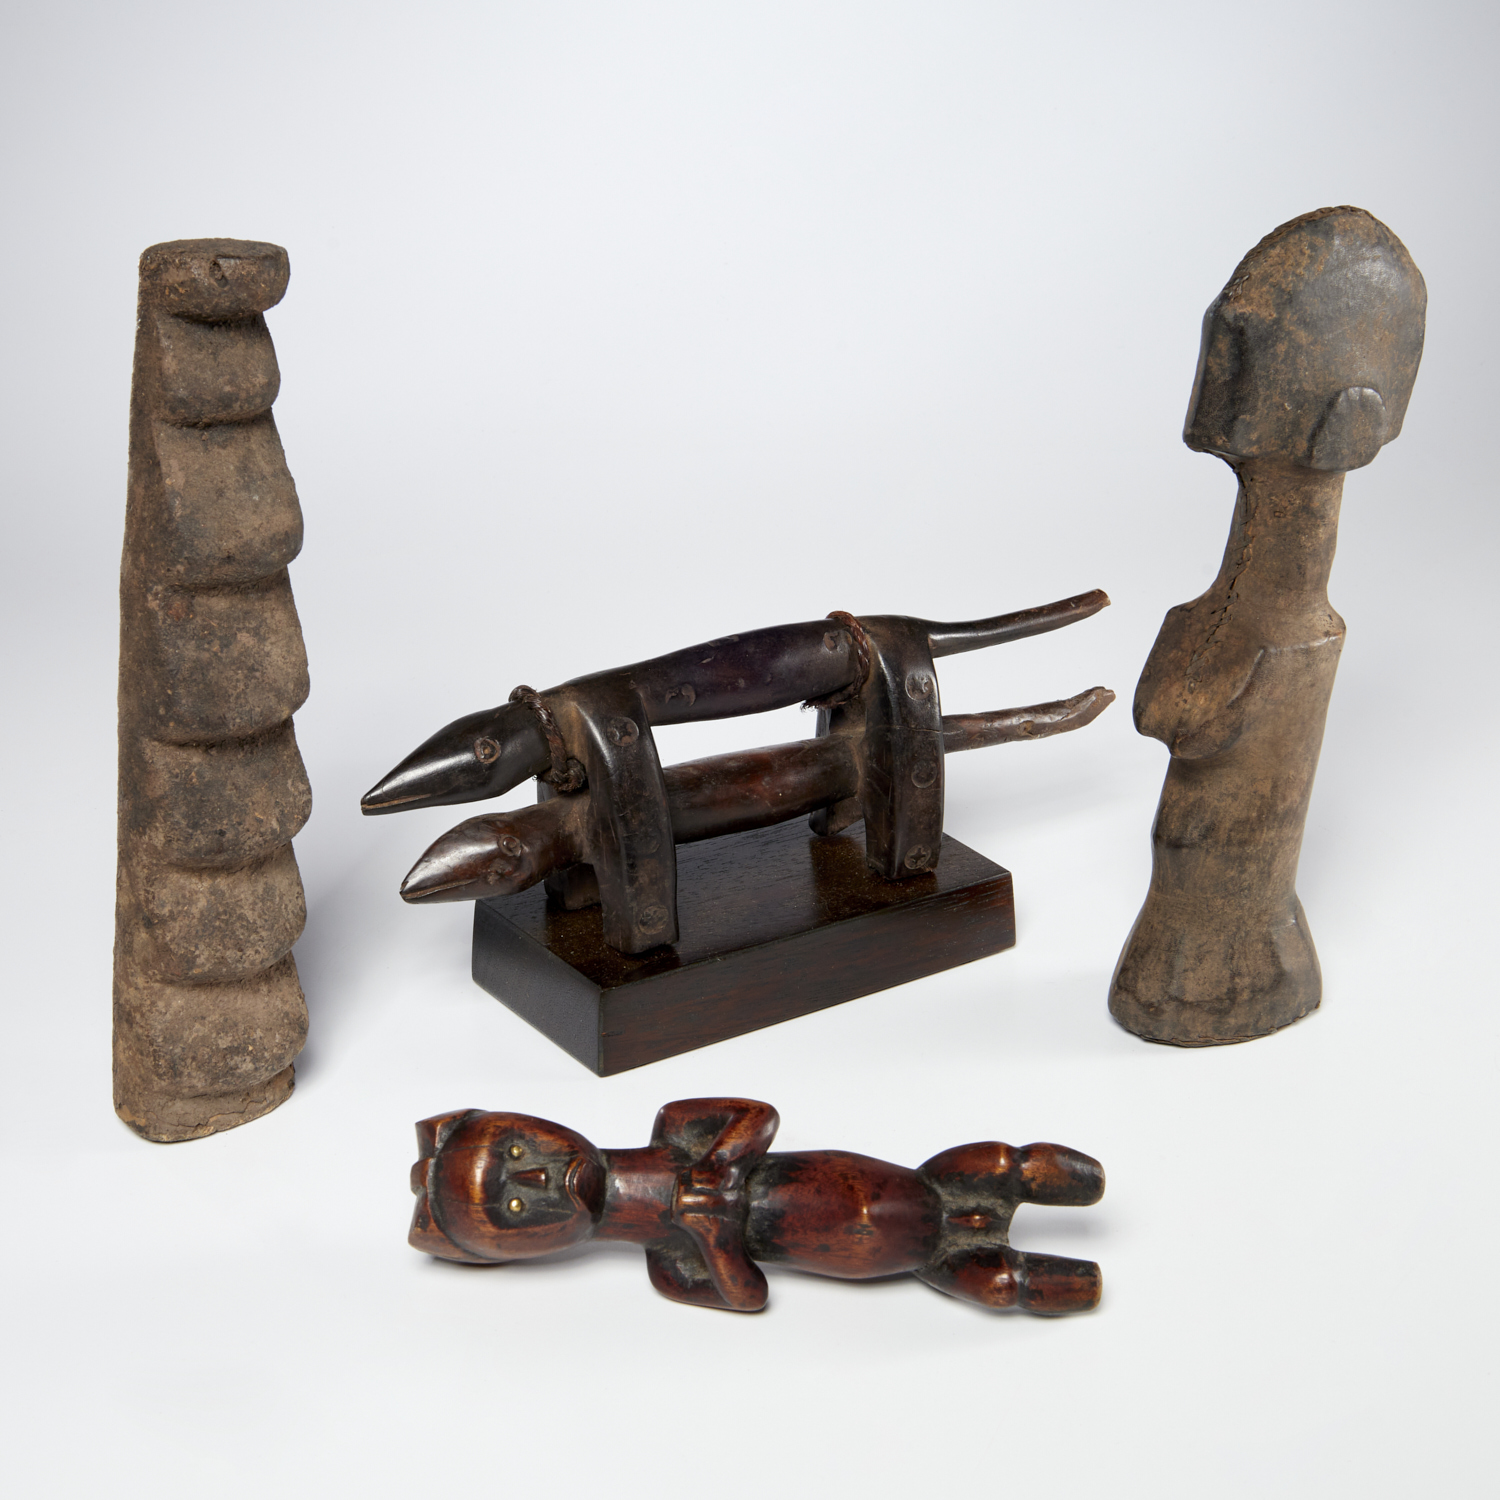 GROUP (4) AFRICAN CARVED WOOD OBJECTS